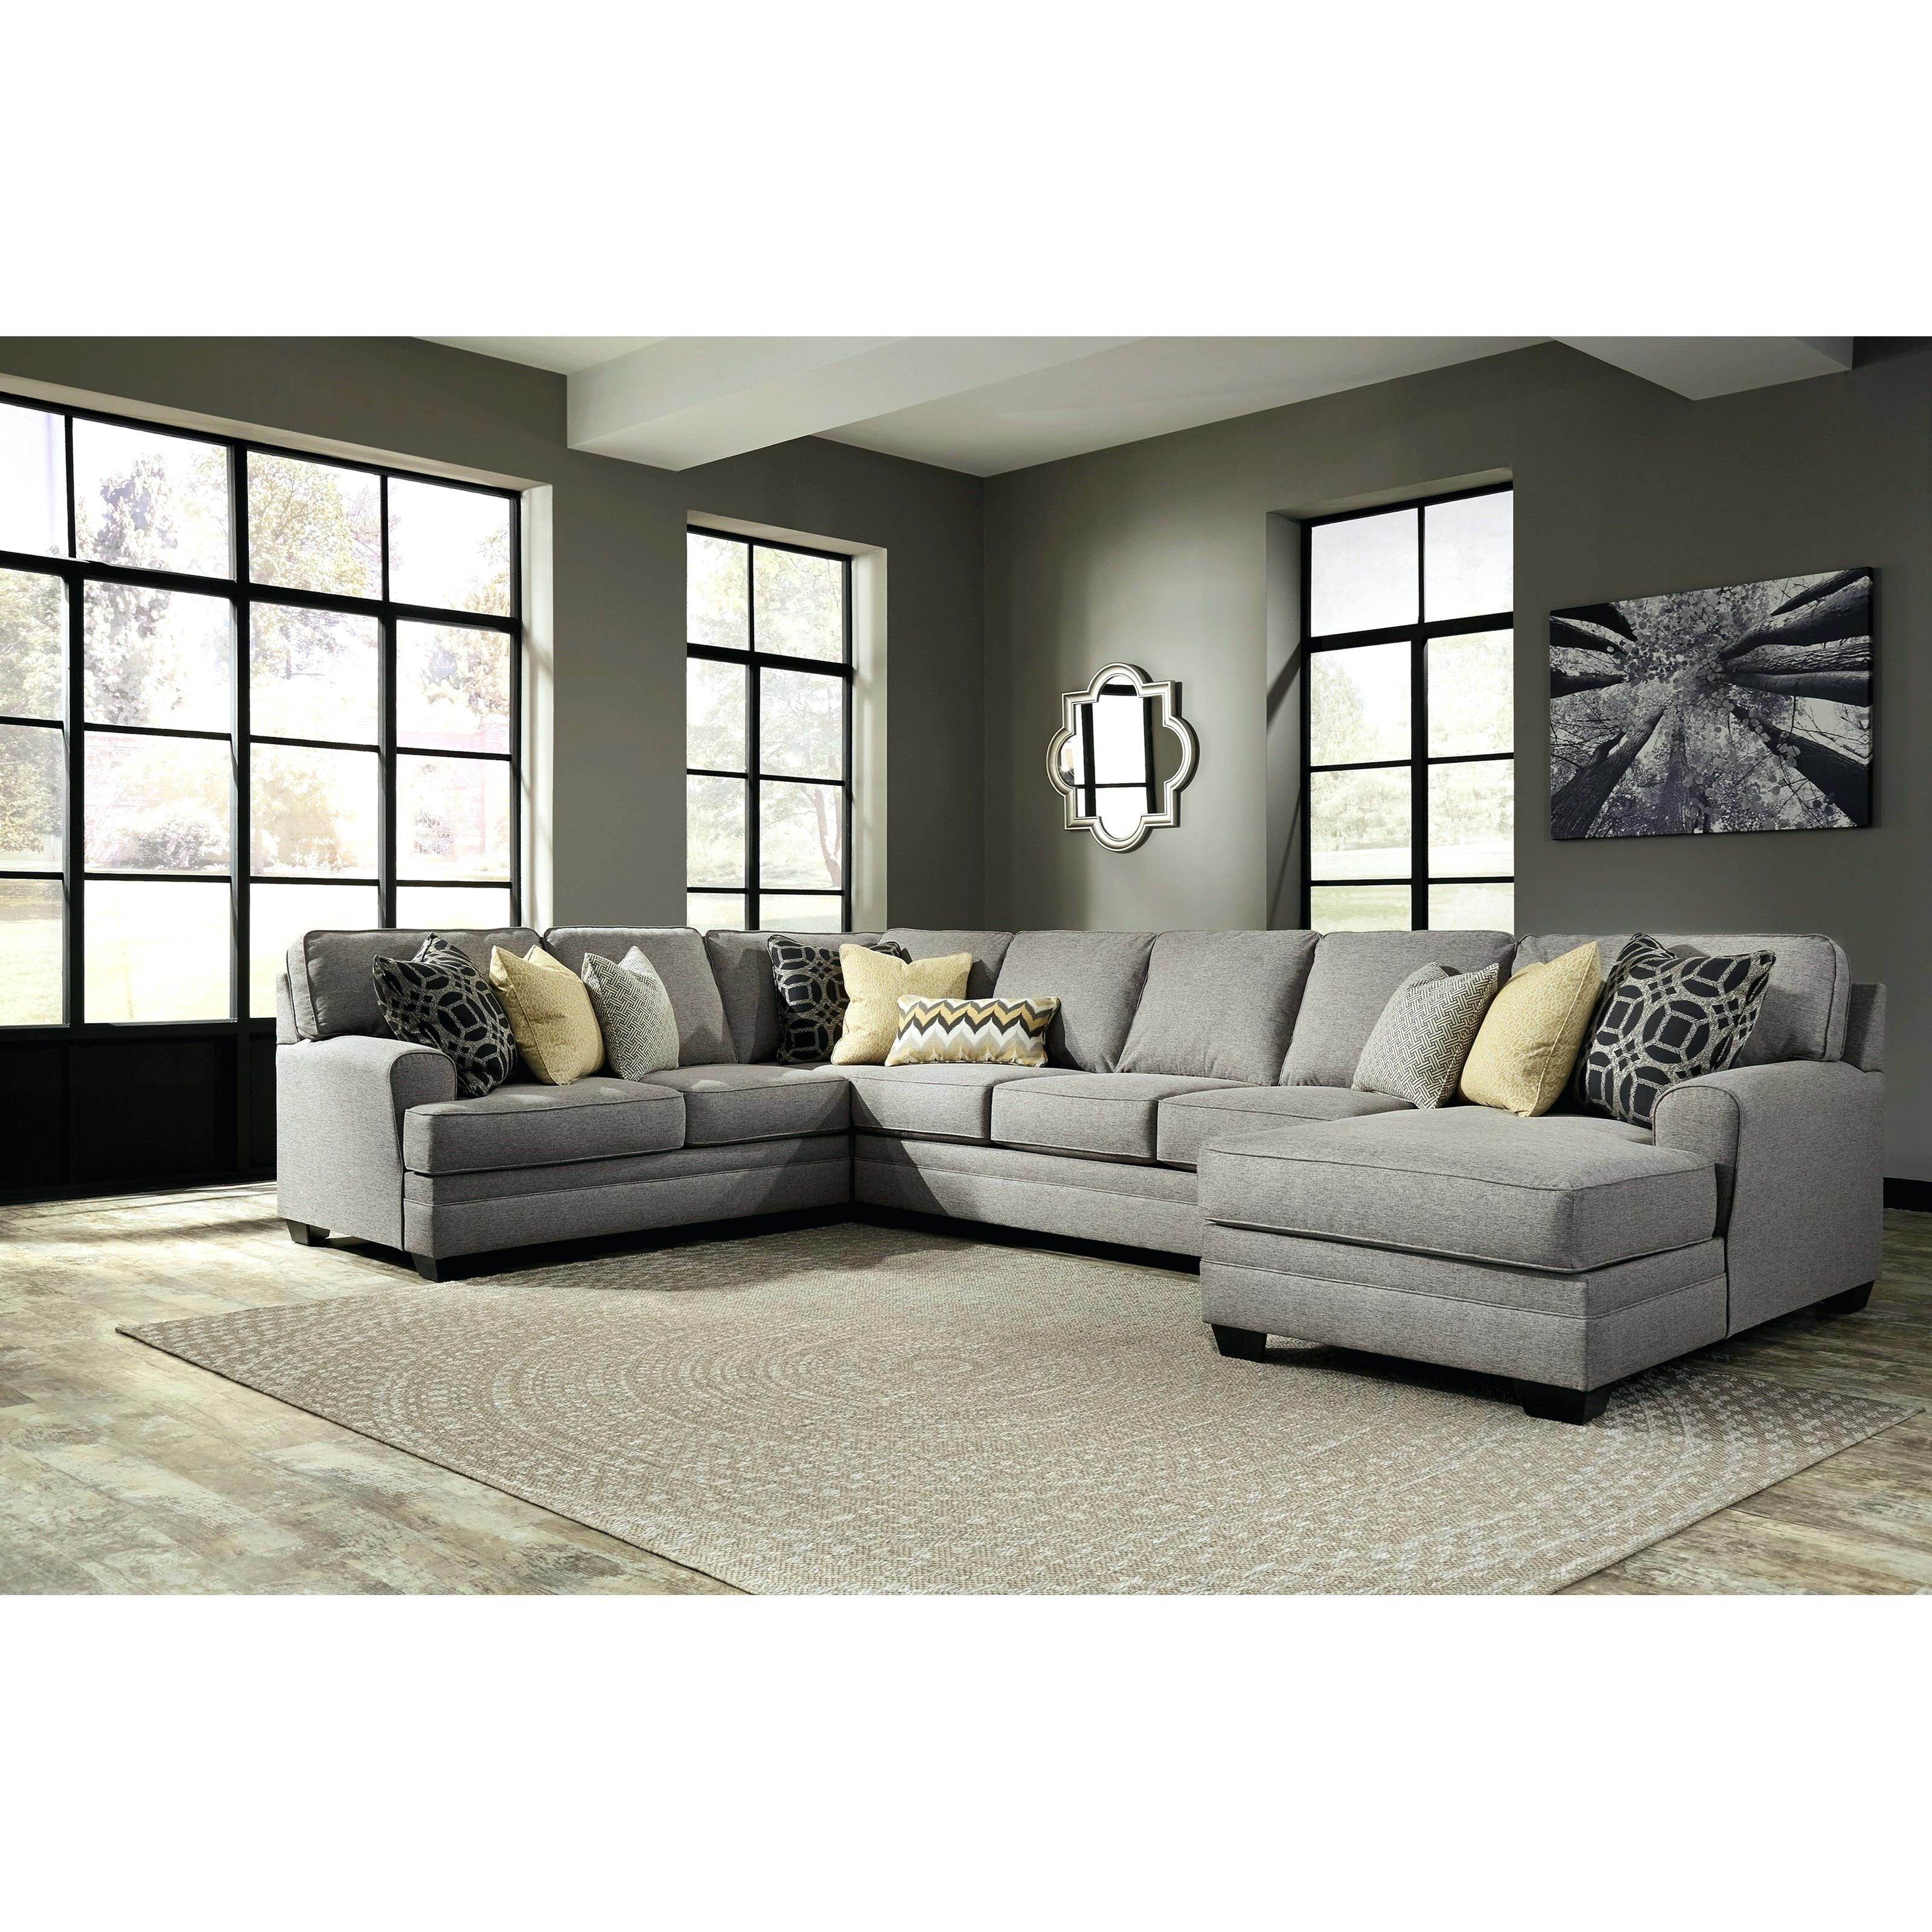 4 Piece Sectional Couch Alder 4 Piece Sectional 4 Piece Sectional Inside Alder 4 Piece Sectionals (View 23 of 30)